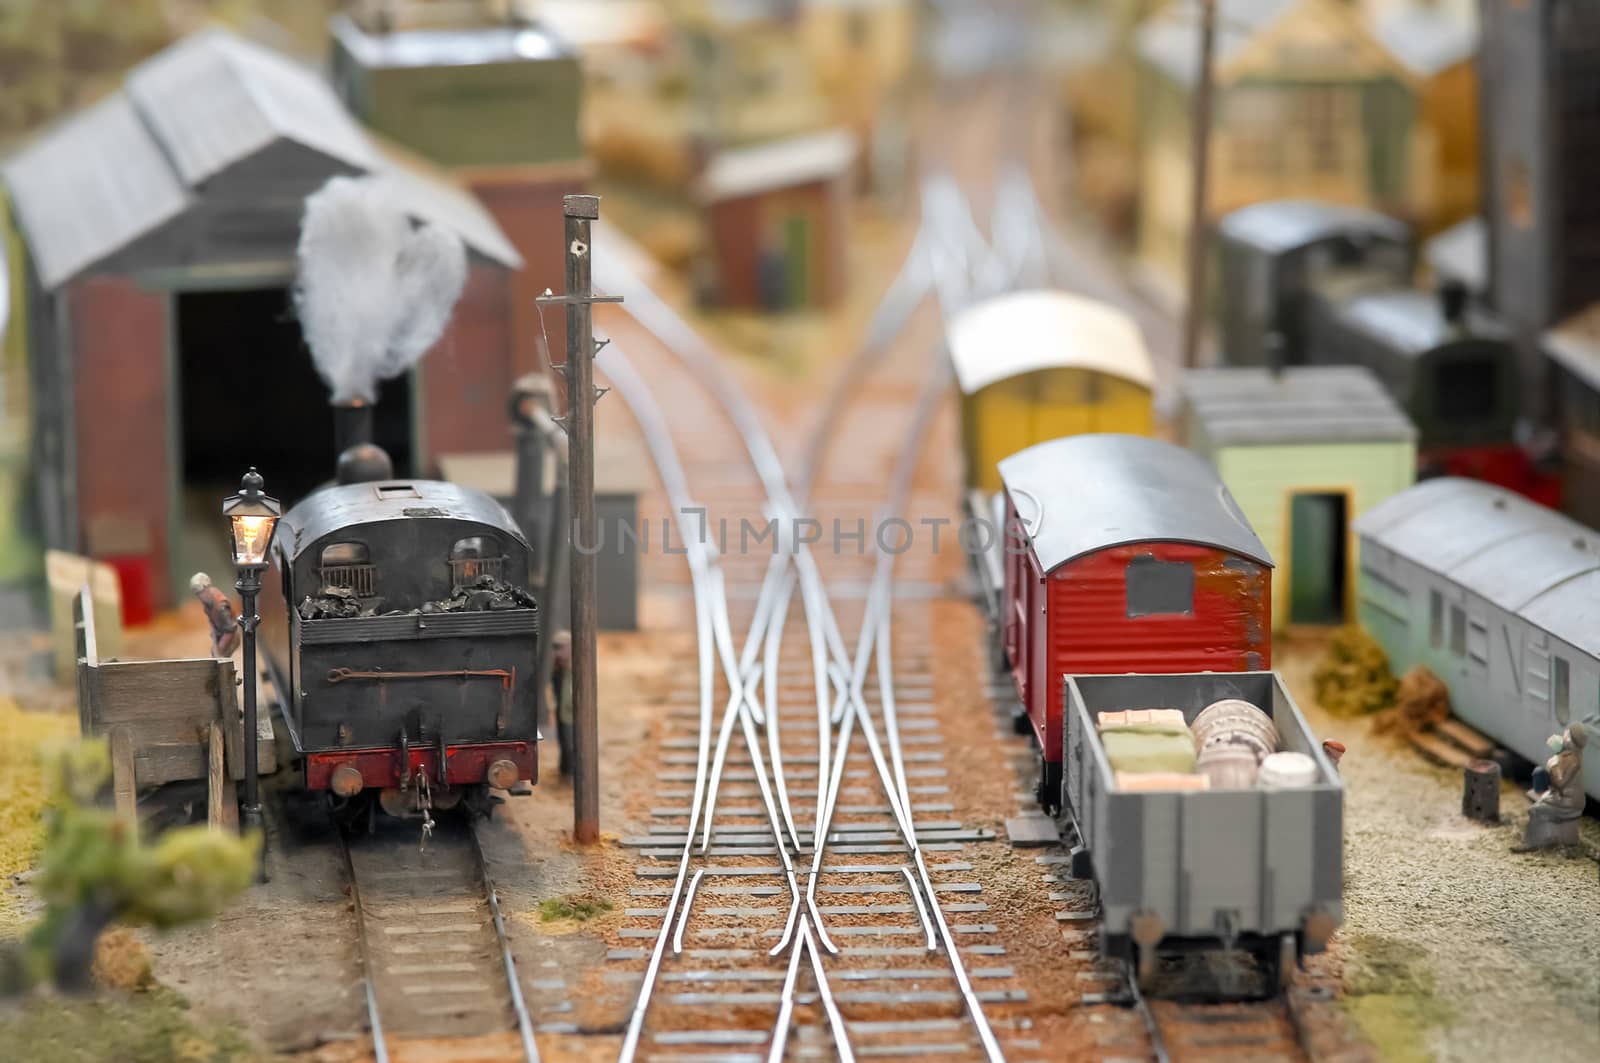 miniature model trains in a freight yard